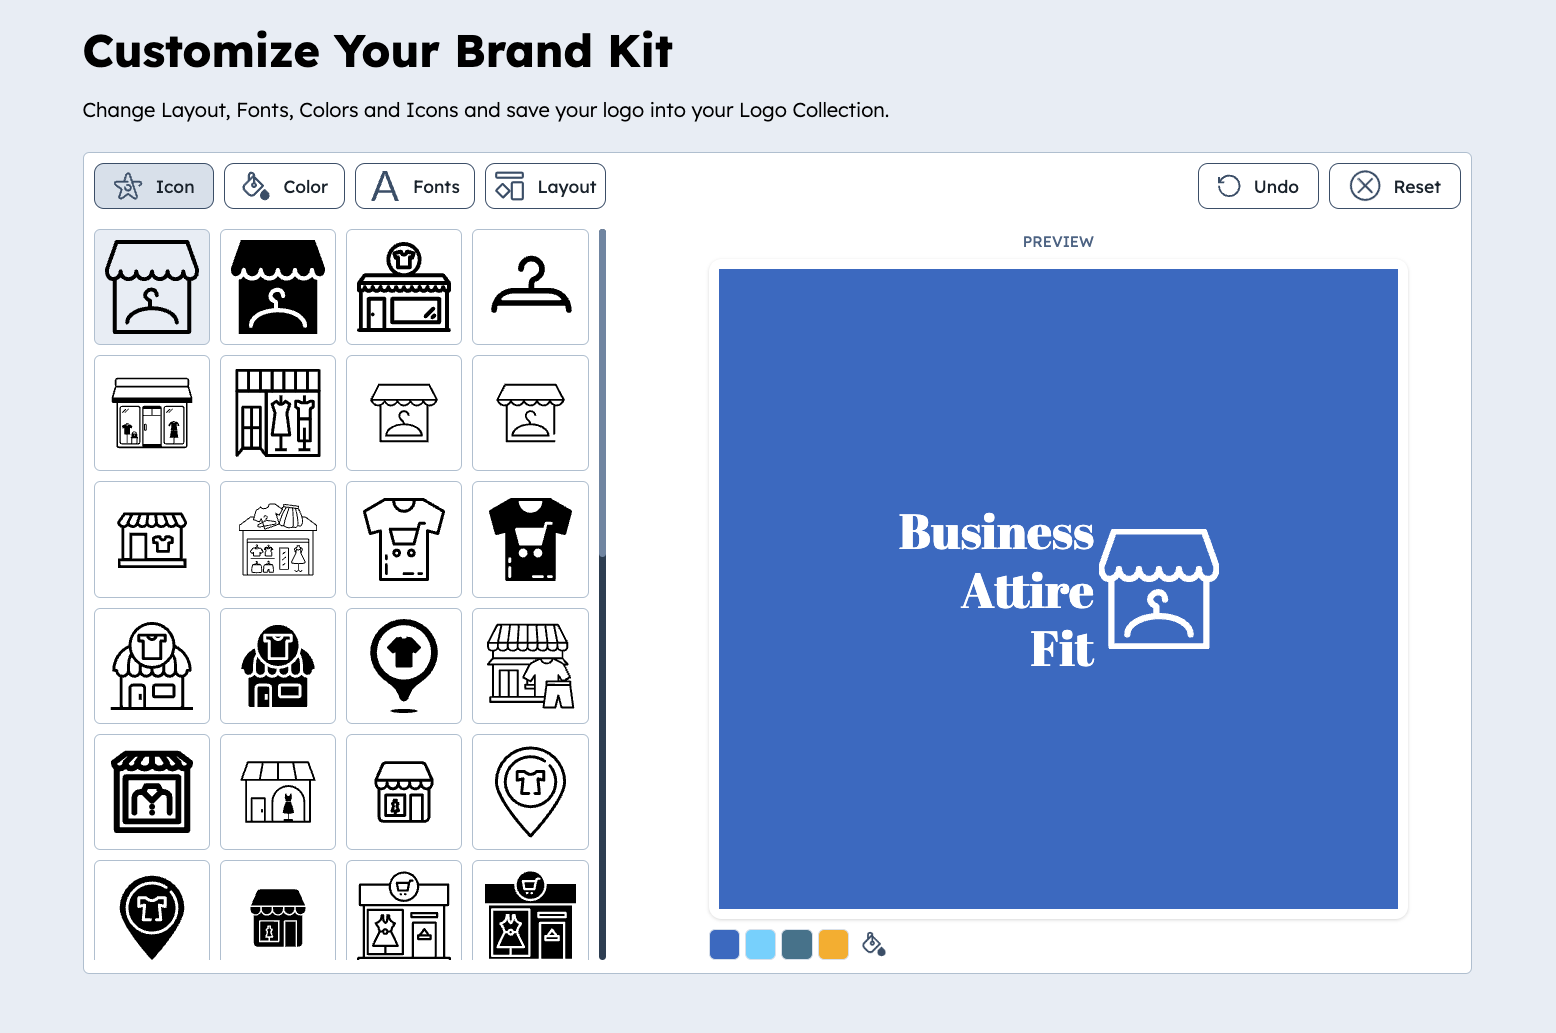 Endless icon possibilities on HubSpot's Brand Kit Generator.